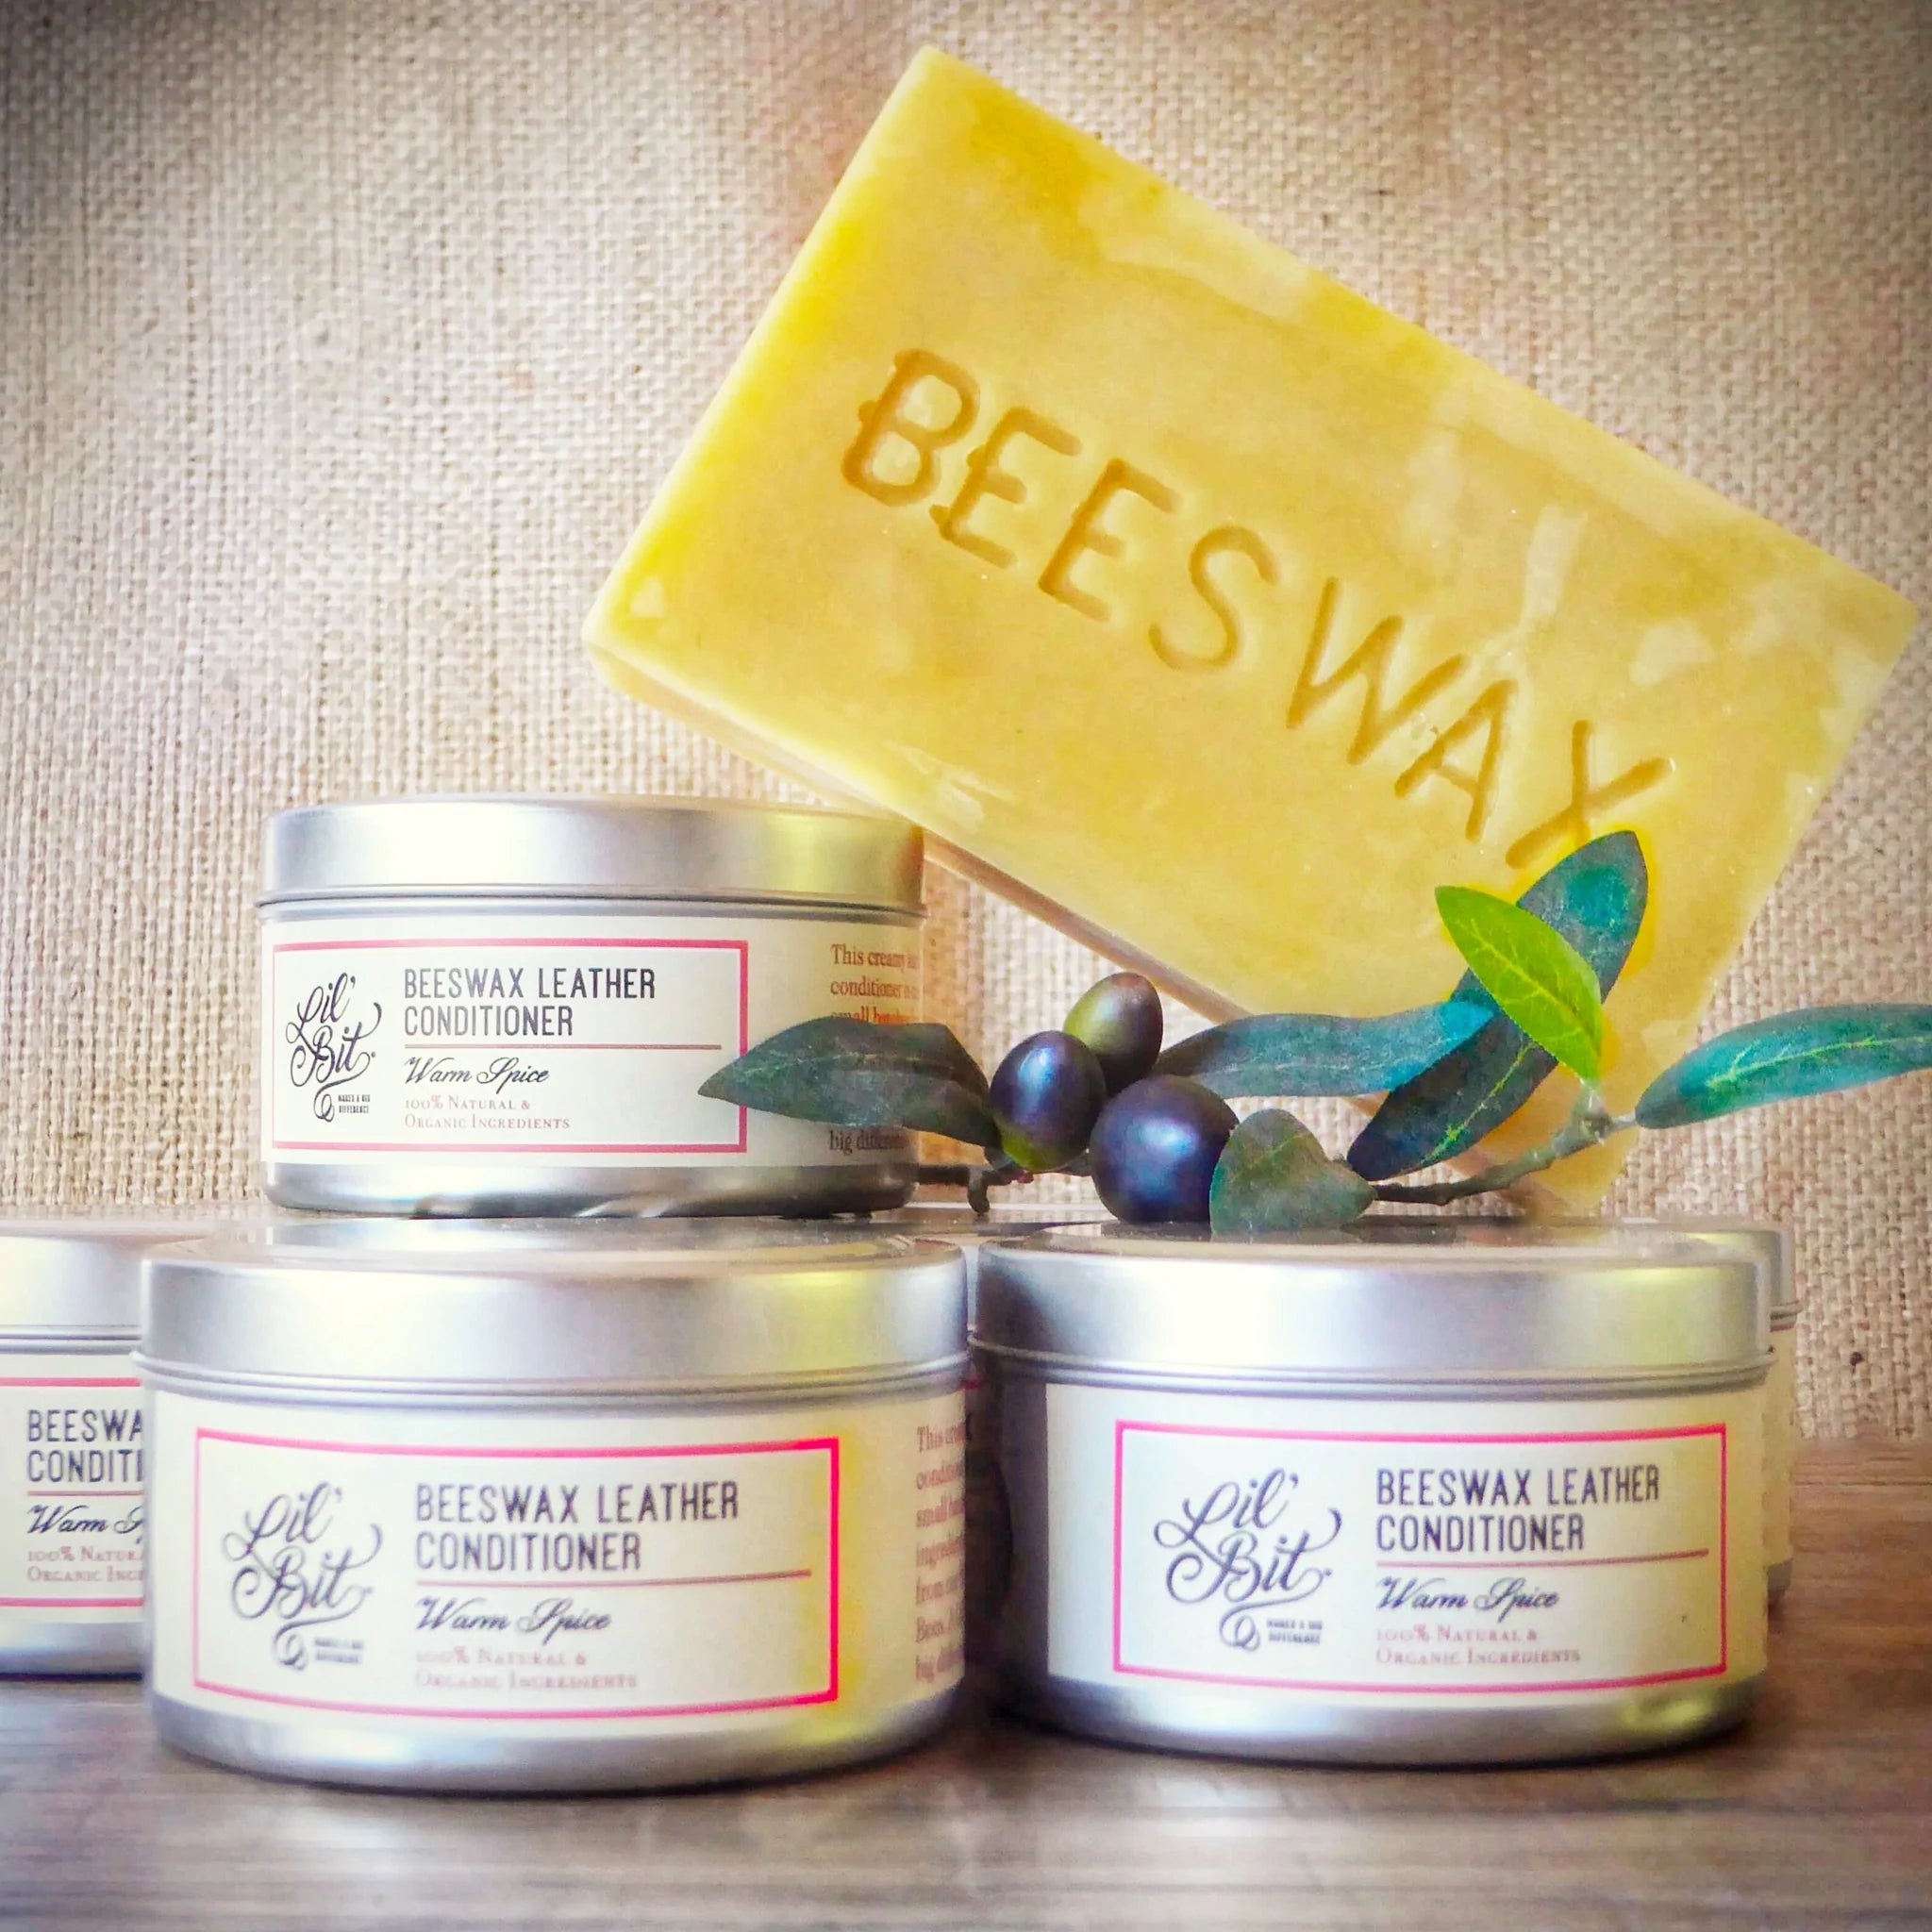 https://banish.com.au/products/warm-spice-beeswax-leather-conditioner-250g?_pos=1&_sid=da6cb4e71&_ss=r